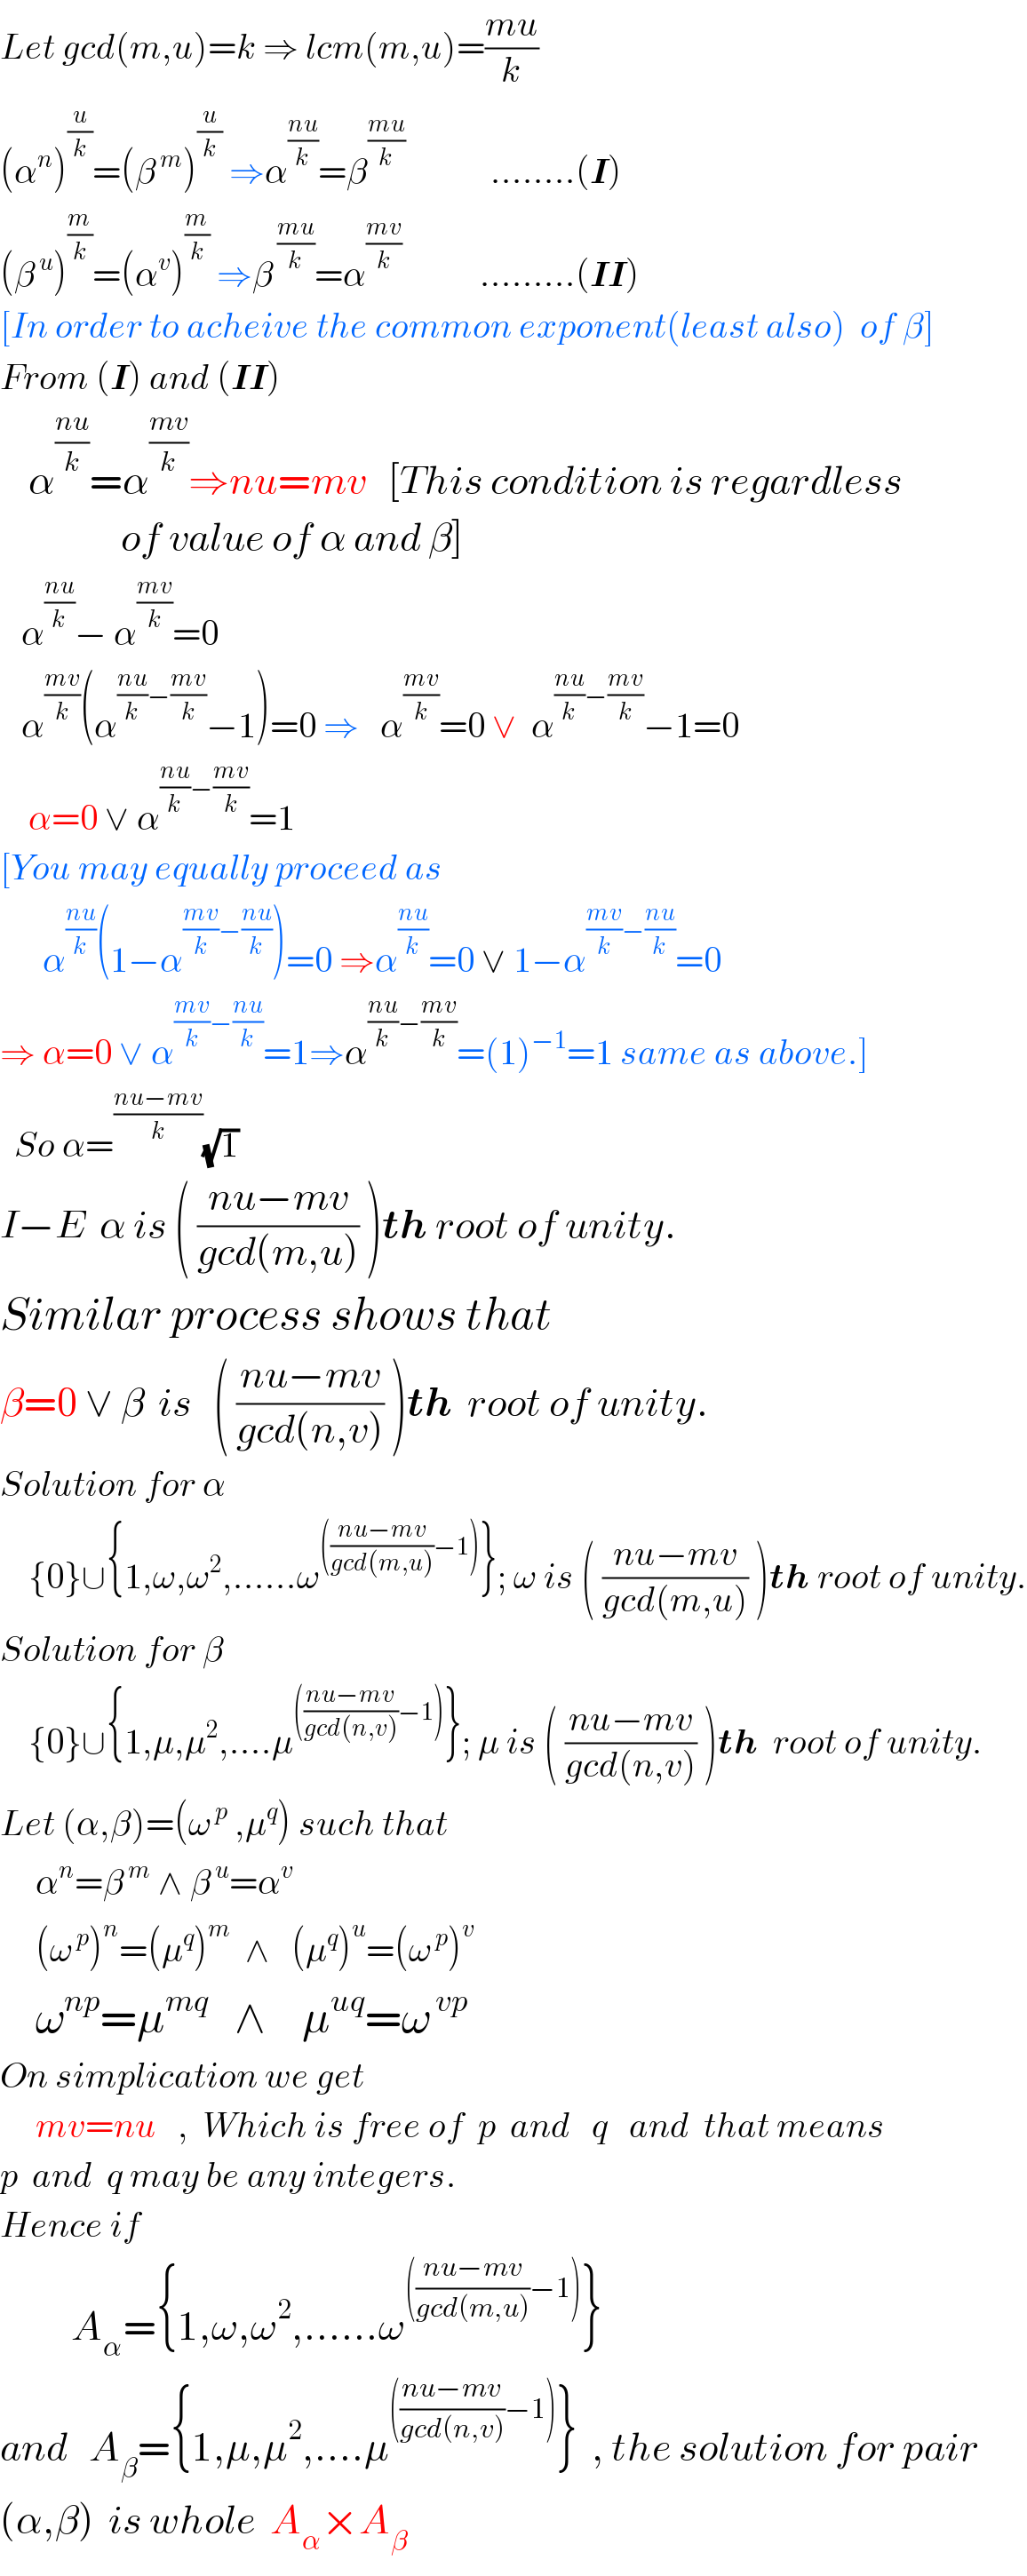 Let gcd(m,u)=k ⇒ lcm(m,u)=((mu)/k)  (α^n )^(u/k) =(β^( m) )^(u/k)  ⇒α^((nu)/k) =β^((mu)/k)             ........(I)   (β^( u) )^(m/k) =(α^v )^(m/k)  ⇒β^( ((mu)/k)) =α^((mv)/k)            .........(II)  [In order to acheive the common exponent(least also)  of β]  From (I) and (II)      α^((nu)/k) =α^((mv)/k) ⇒nu=mv   [This condition is regardless                    of value of α and β]     α^((nu)/k) − α^((mv)/k) =0     α^((mv)/k) (α^(((nu)/k)−((mv)/k)) −1)=0 ⇒   α^((mv)/k) =0 ∨  α^(((nu)/k)−((mv)/k)) −1=0      α=0 ∨ α^(((nu)/k)−((mv)/k)) =1  [You may equally proceed as         α^((nu)/k) (1−α^(((mv)/k)−((nu)/k)) )=0 ⇒α^((nu)/k) =0 ∨ 1−α^(((mv)/k)−((nu)/k)) =0  ⇒ α=0 ∨ α^(((mv)/k)−((nu)/k)) =1⇒α^(((nu)/k)−((mv)/k)) =(1)^(−1) =1 same as above.]    So α=^((nu−mv)/k) (√1)  I−E  α is ( ((nu−mv)/(gcd(m,u))) )th root of unity.  Similar process shows that  β=0 ∨ β  is   ( ((nu−mv)/(gcd(n,v))) )th  root of unity.  Solution for α      {0}∪{1,ω,ω^2 ,......ω^((((nu−mv)/(gcd(m,u)))−1)) }; ω is ( ((nu−mv)/(gcd(m,u))) )th root of unity.  Solution for β      {0}∪{1,μ,μ^2 ,....μ^((((nu−mv)/(gcd(n,v)))−1)) }; μ is ( ((nu−mv)/(gcd(n,v))) )th  root of unity.  Let (α,β)=(ω^( p)  ,μ^q ) such that       α^n =β^( m)  ∧ β^( u) =α^v        (ω^( p) )^n =(μ^q )^m   ∧   (μ^q )^u =(ω^( p) )^v       ω^(np) =μ^(mq)    ∧    μ^(uq) =ω^( vp)   On simplication we get       mv=nu   ,  Which is free of  p  and   q   and  that means  p  and  q may be any integers.  Hence if            A_α ={1,ω,ω^2 ,......ω^((((nu−mv)/(gcd(m,u)))−1)) }    and   A_β ={1,μ,μ^2 ,....μ^((((nu−mv)/(gcd(n,v)))−1)) }  , the solution for pair  (α,β)  is whole  A_α ×A_β   